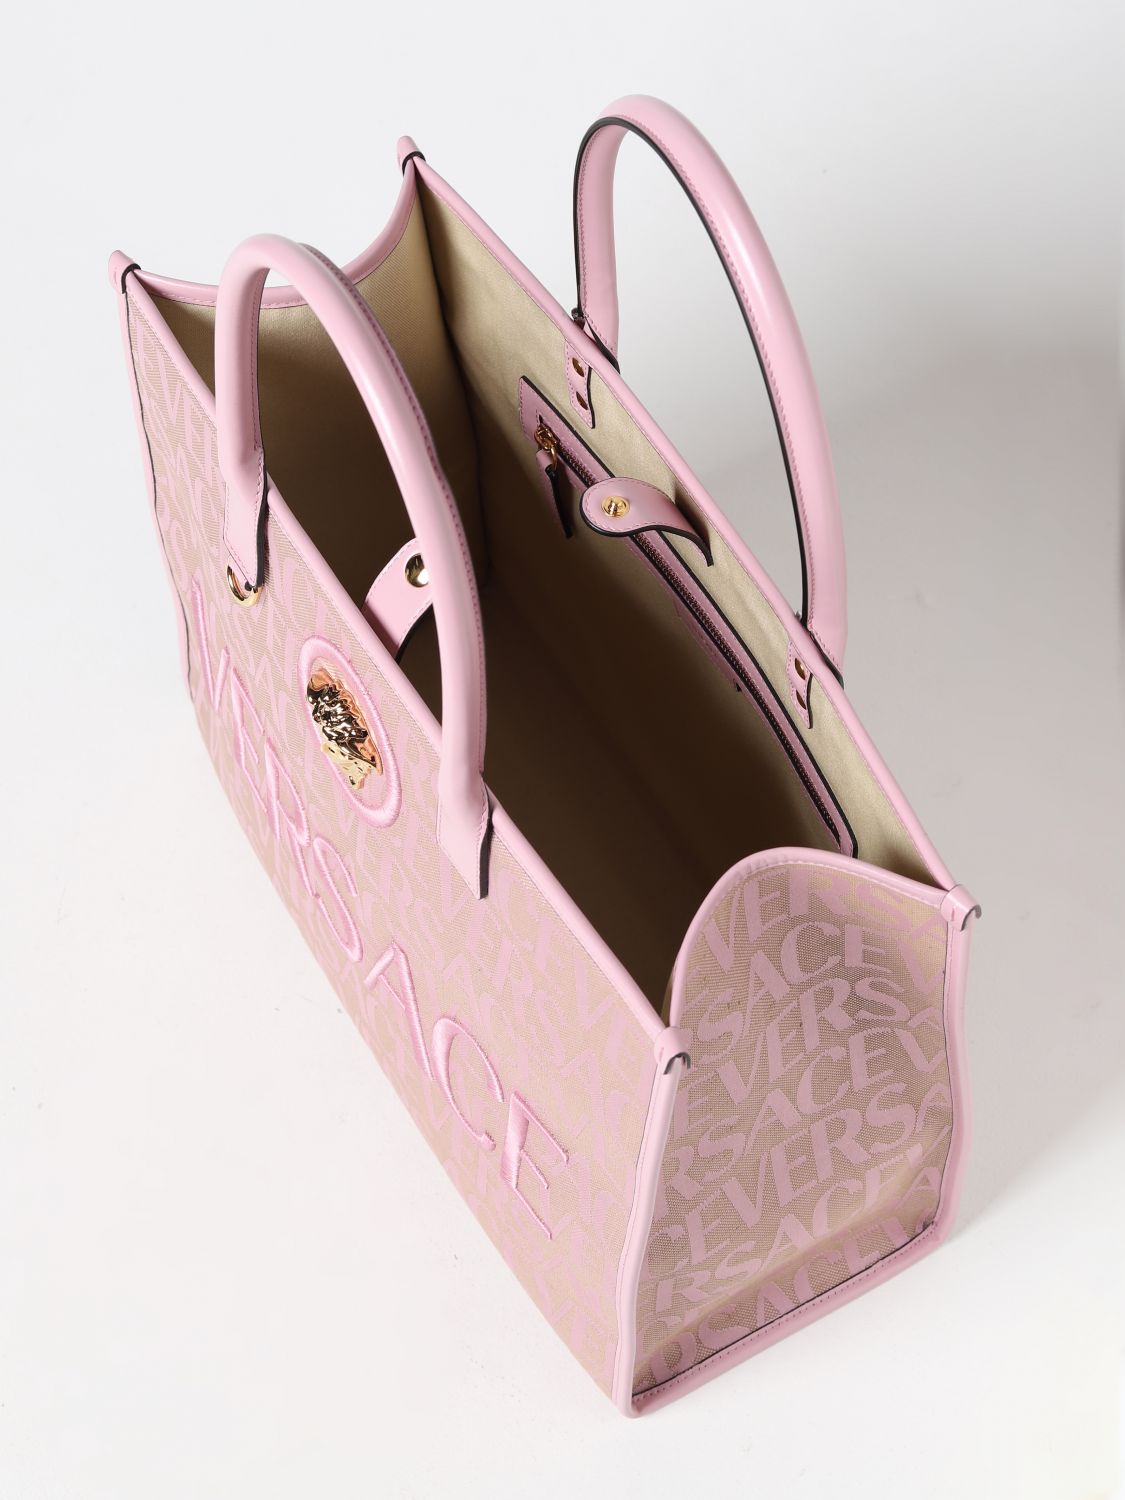 VERSACE: bag in canvas with all over logo - Pink  Versace tote bags  10047411A06544 online at